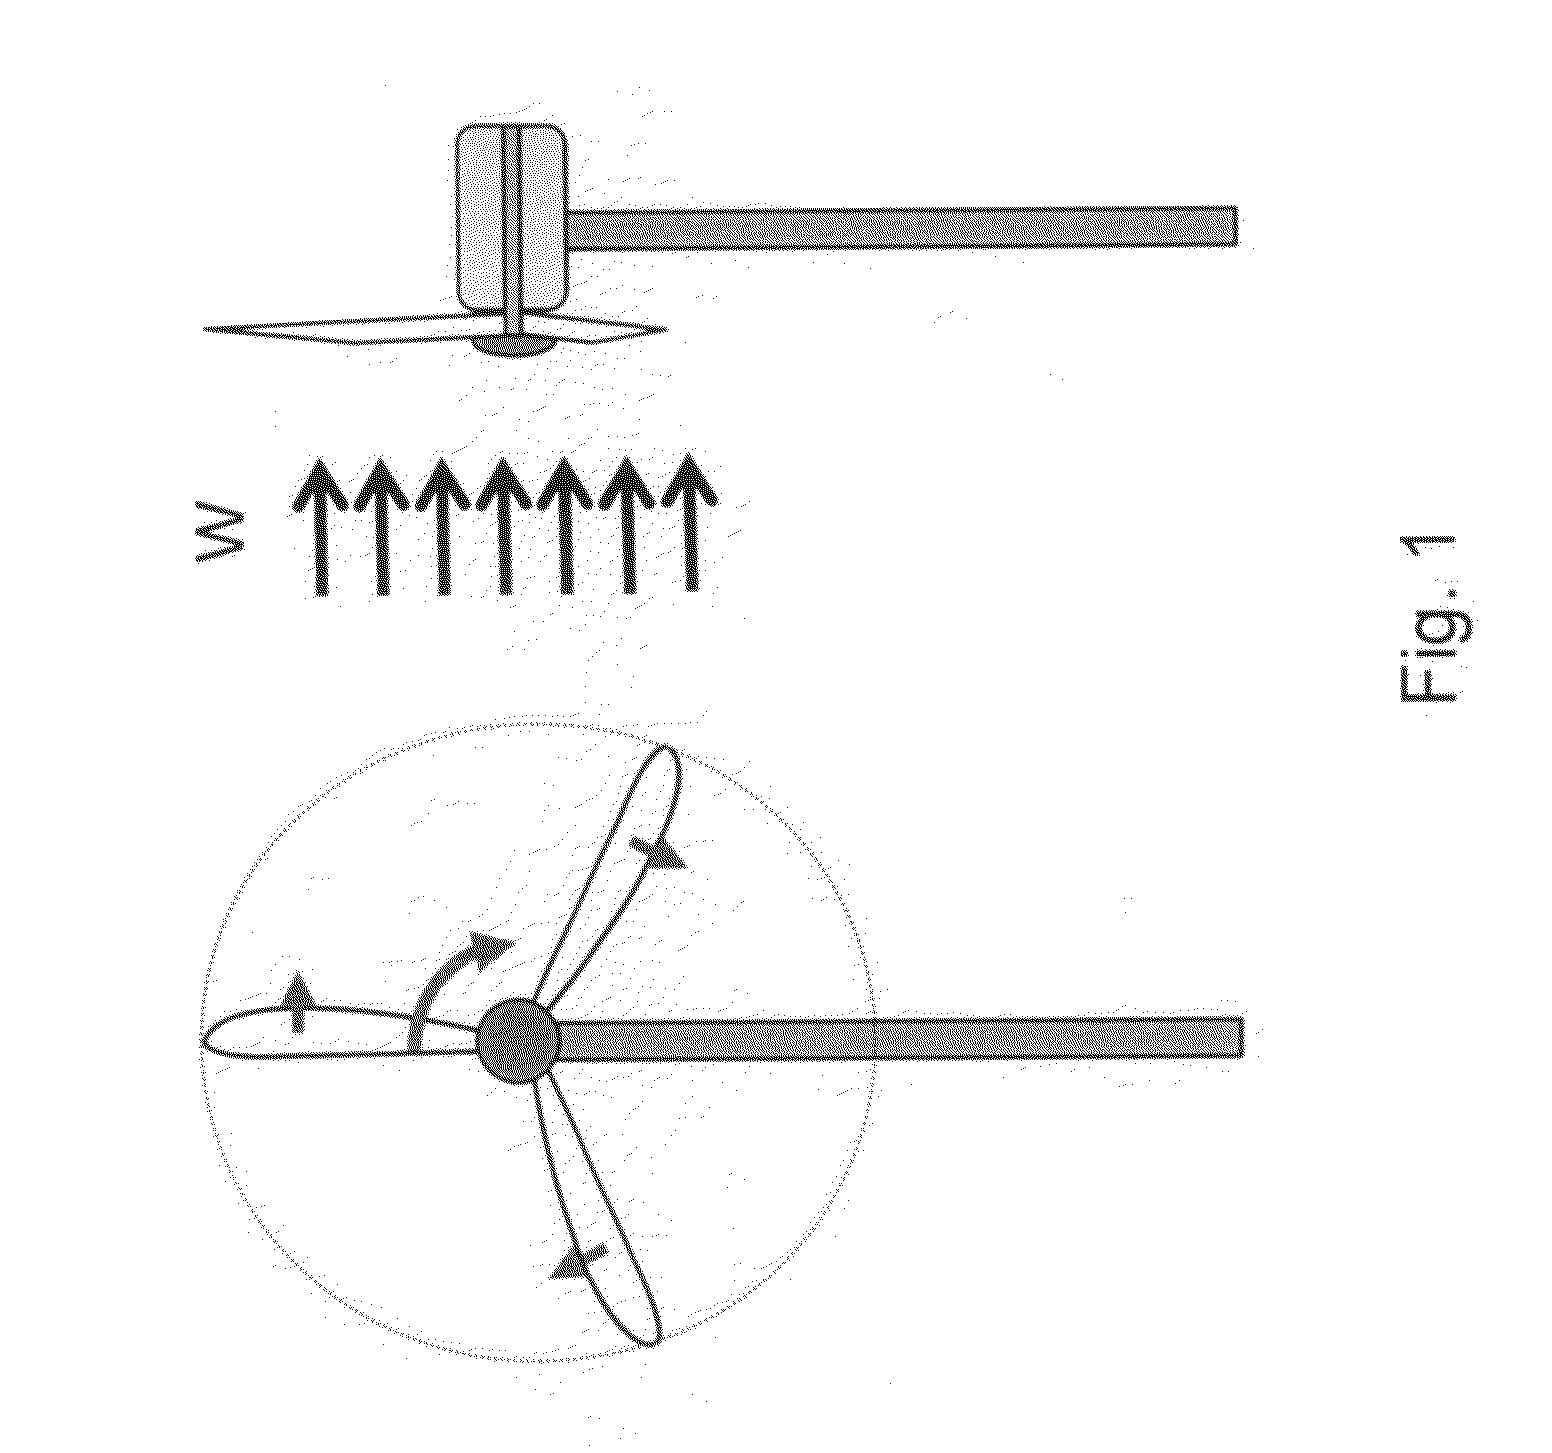 Airfoil blades with self-alignment mechanisms for cross-flow turbines